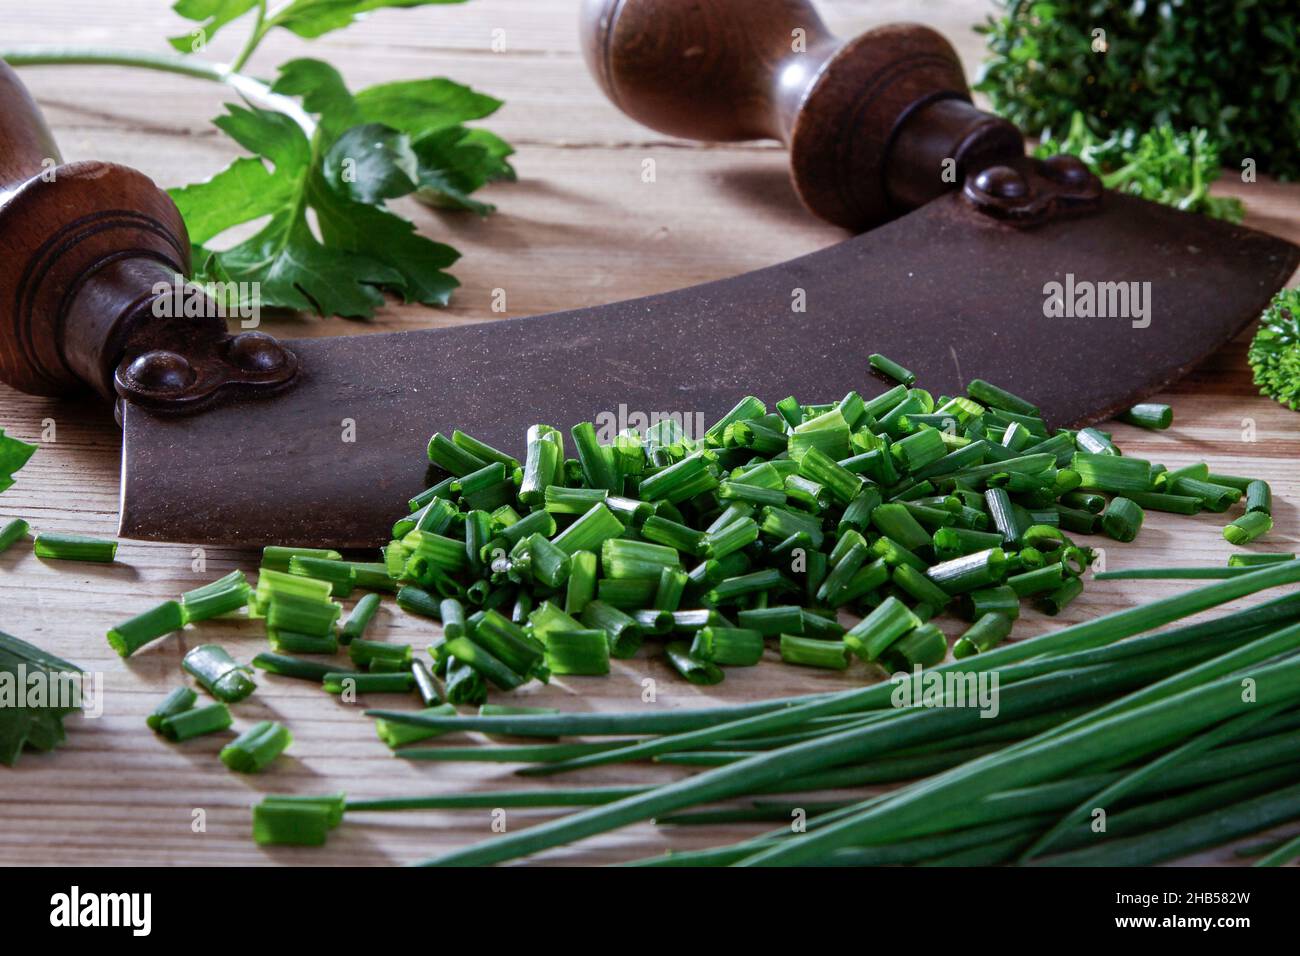 old chopping knife with leek and parsley on a wooden background Stock Photo